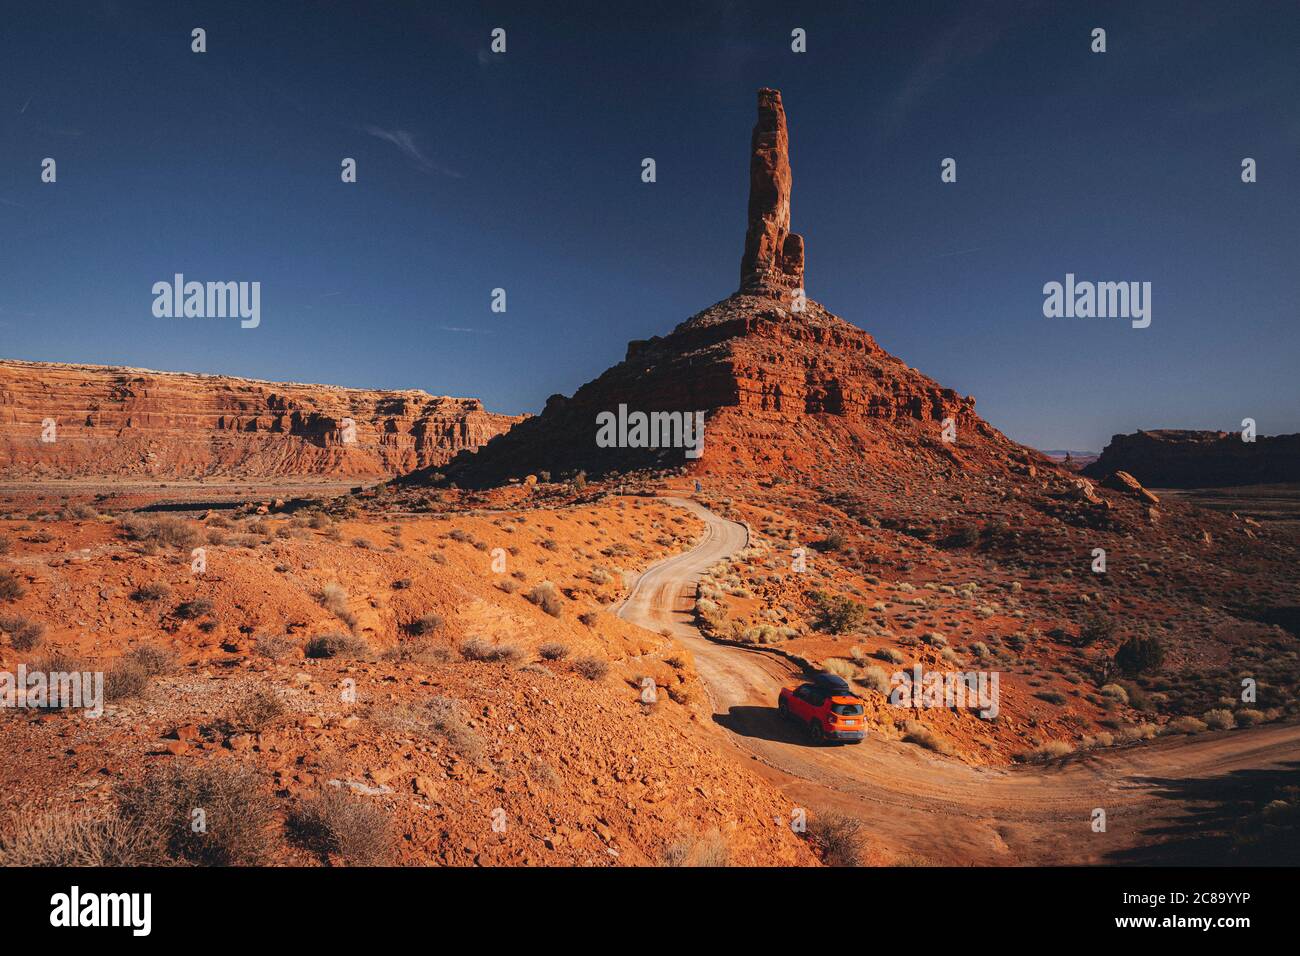 An orange car is driving through the Valley of Gods, Utah Stock Photo